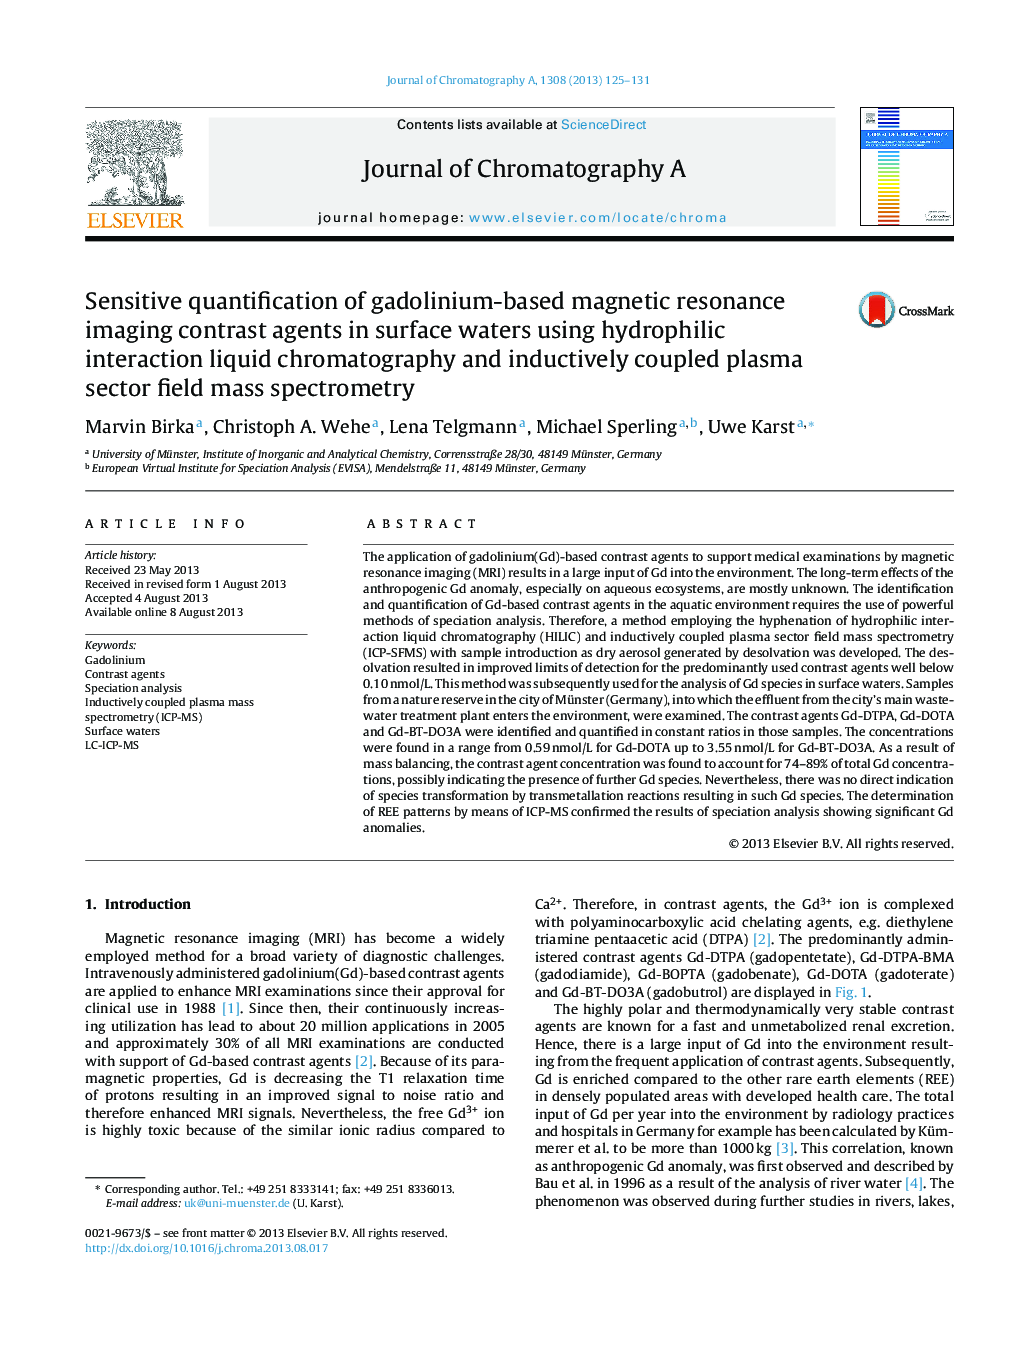 Sensitive quantification of gadolinium-based magnetic resonance imaging contrast agents in surface waters using hydrophilic interaction liquid chromatography and inductively coupled plasma sector field mass spectrometry